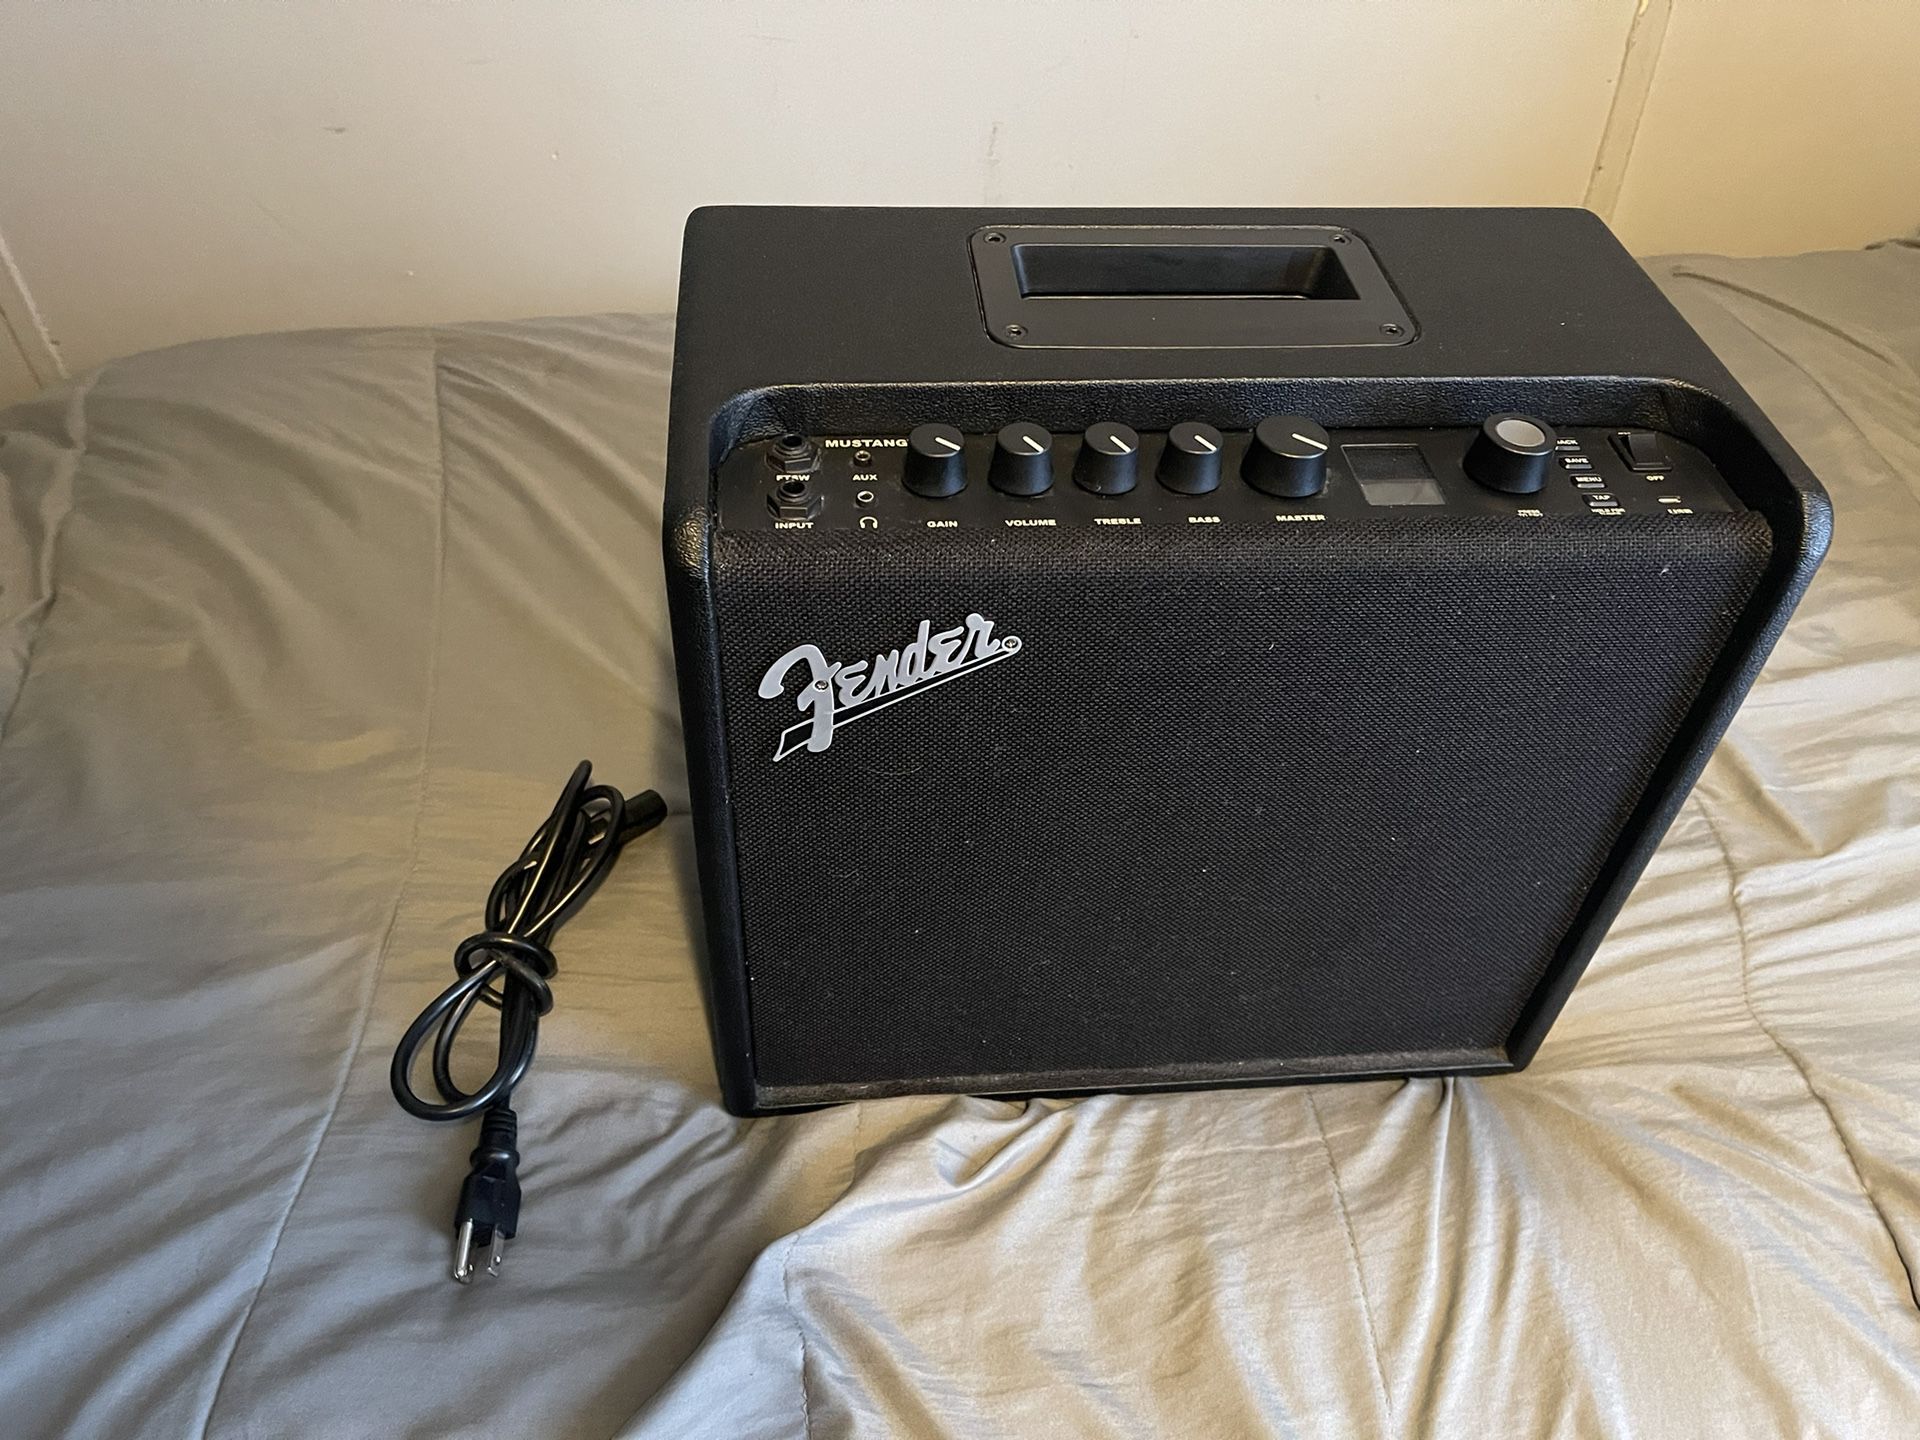 Fender Mustang Lt25 for Sale in Liberty Township, OH OfferUp